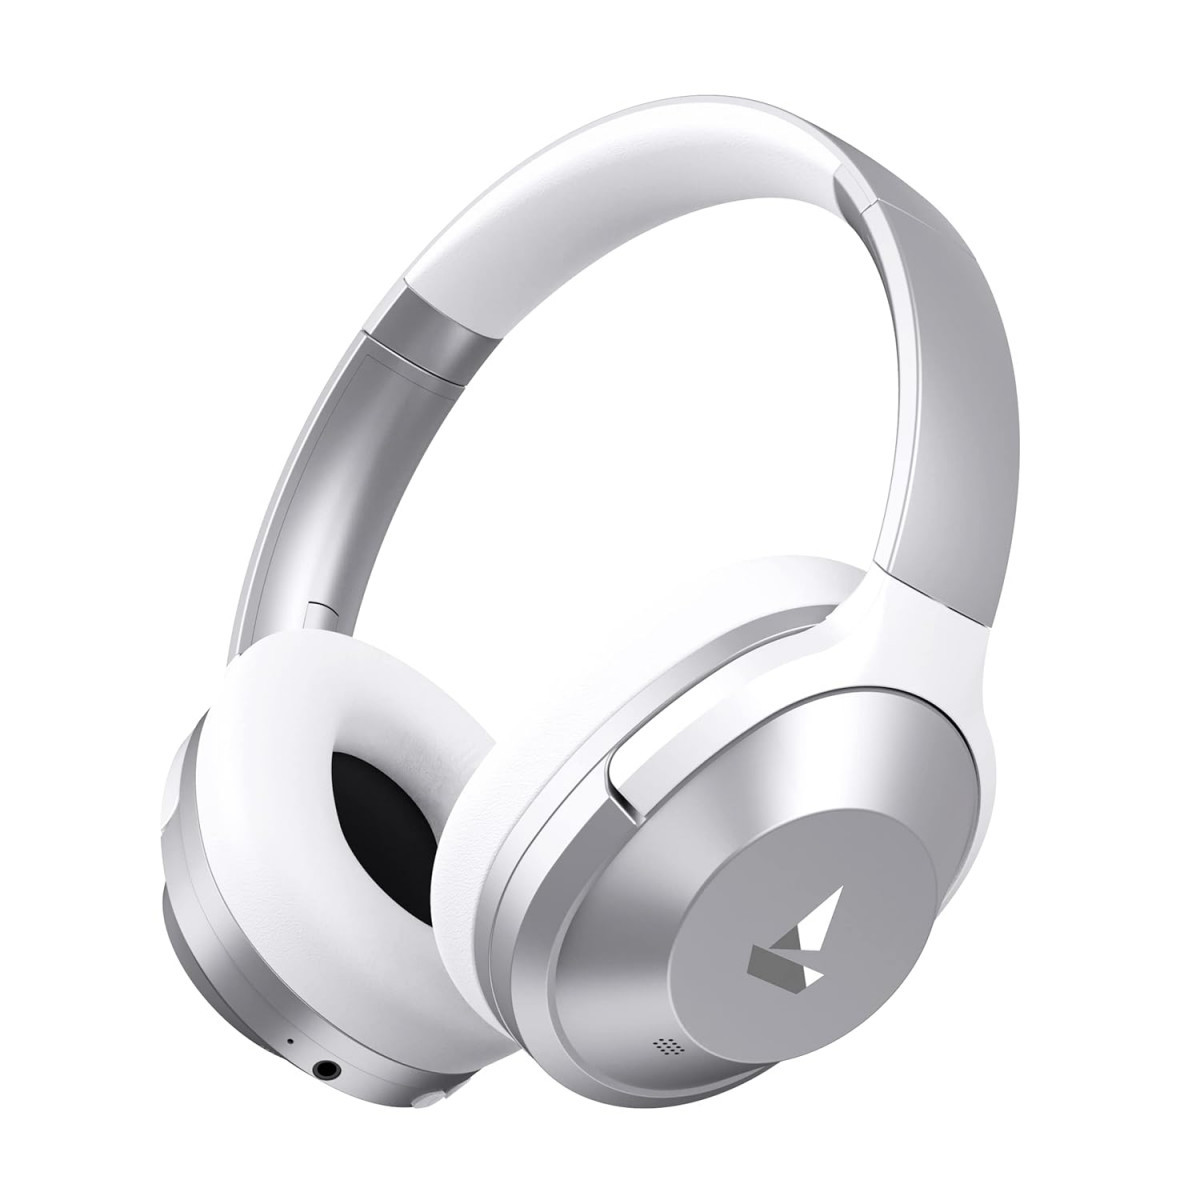 boAt Nirvana 751 ANC Hybrid Active Noise Cancelling Bluetooth Wireless Over Ear Headphones Silver Sterling